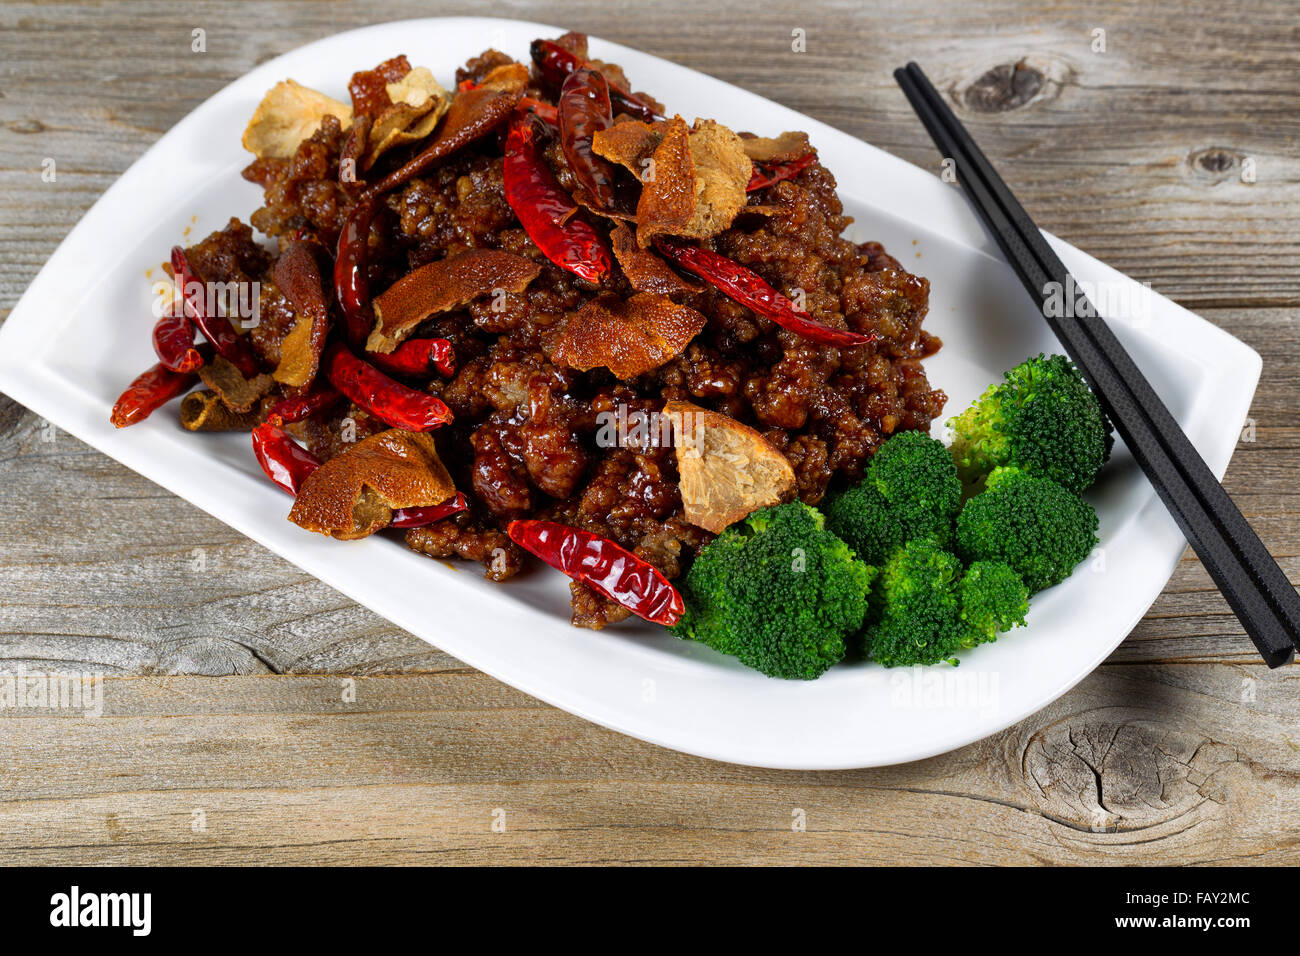 Close up front view of Chinese dish consisting of fried tofu, chicken, red peppers, and broccoli. Stock Photo